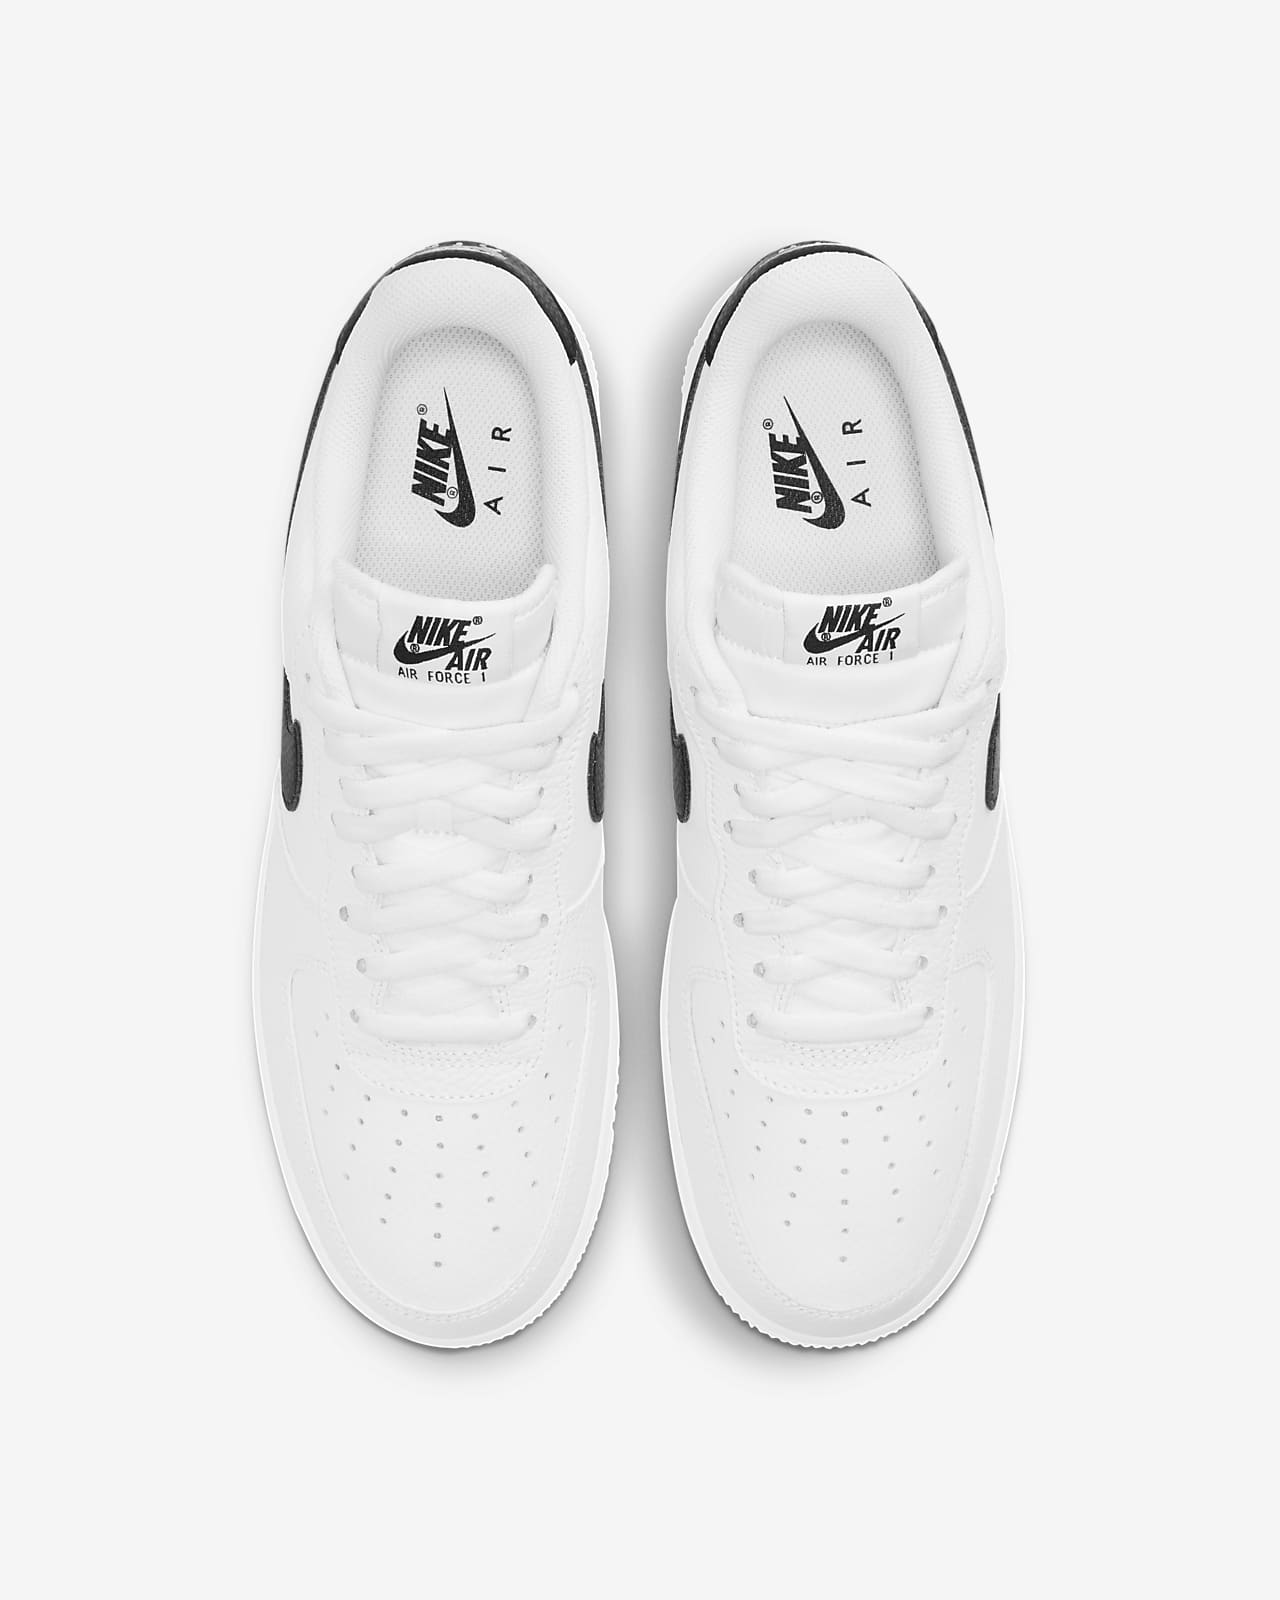 Chaussure Nike Air Force 1 '07 pour Homme. Nike LU